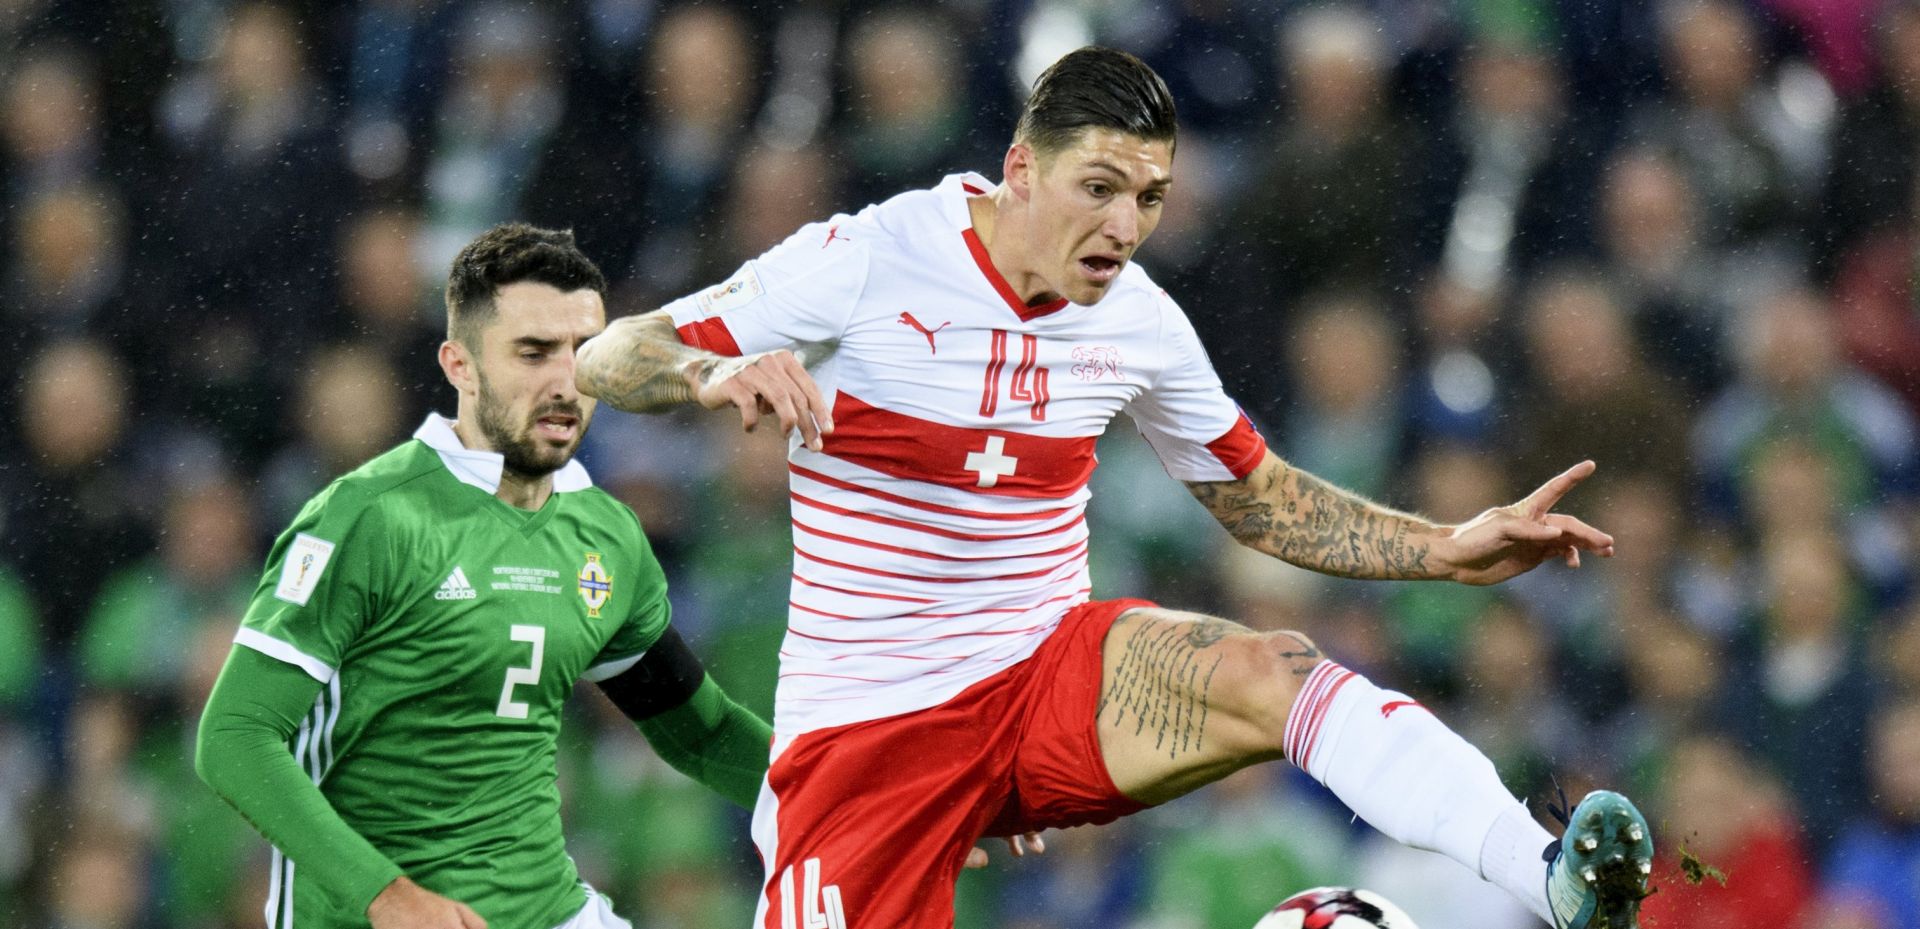 epa06318939 Northern Ireland's defender Conor McLaughlin, left, fights for the ball with Switzerland's midfielder Steven Zuber, right, during the 2018 Fifa World Cup play-offs first leg soccer match Northern Ireland against Switzerland at Windsor Park, in Belfast, Northern Ireland, Britain, Thursday, November 9, 2017.  EPA/LAURENT GILLIERON